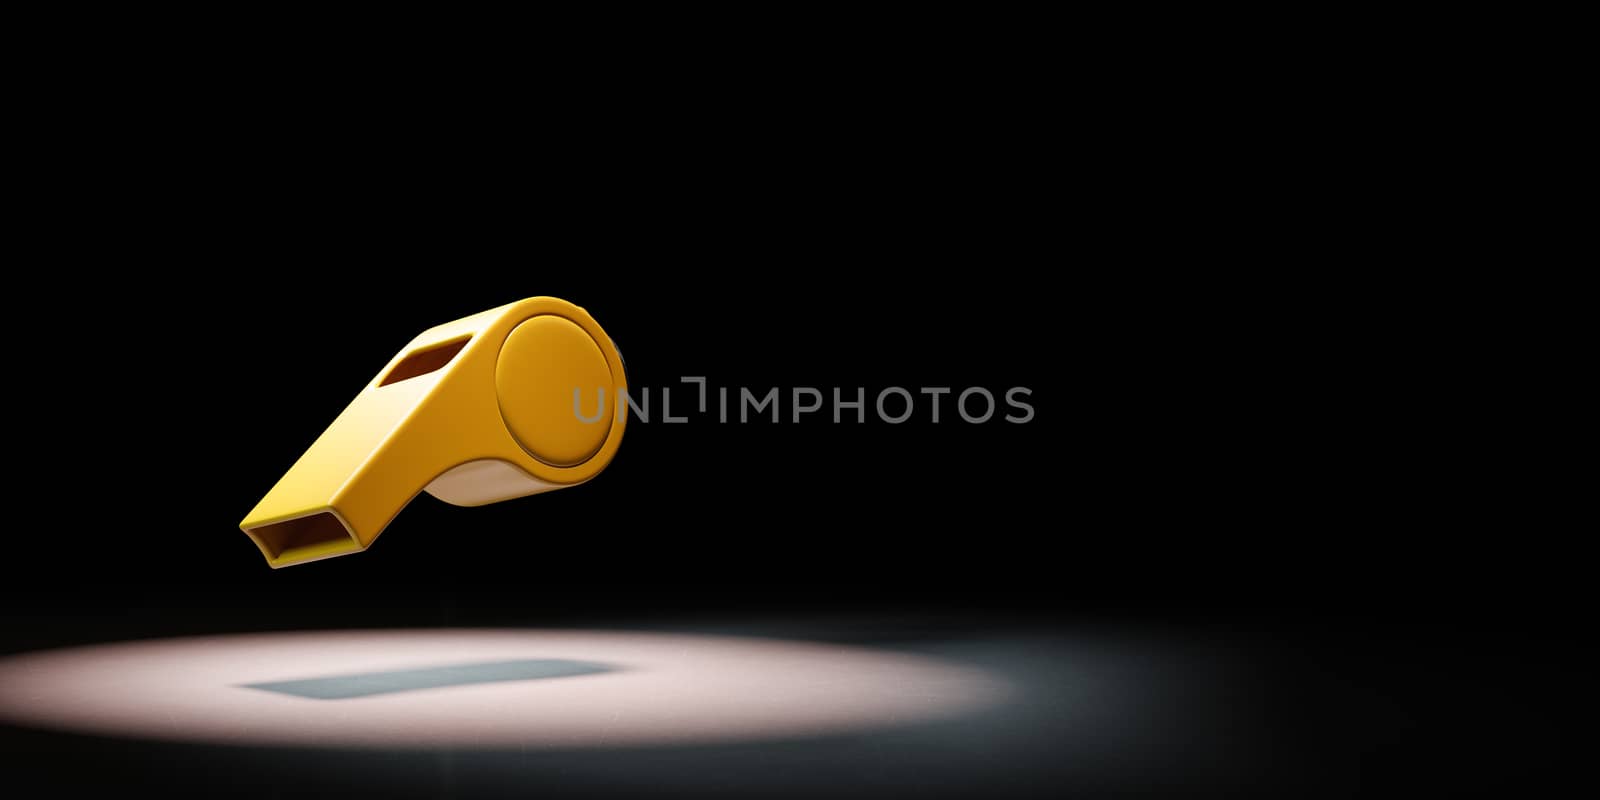 One Yellow Plastic Whistle Spotlighted on Black Background with Copy Space 3D Illustration